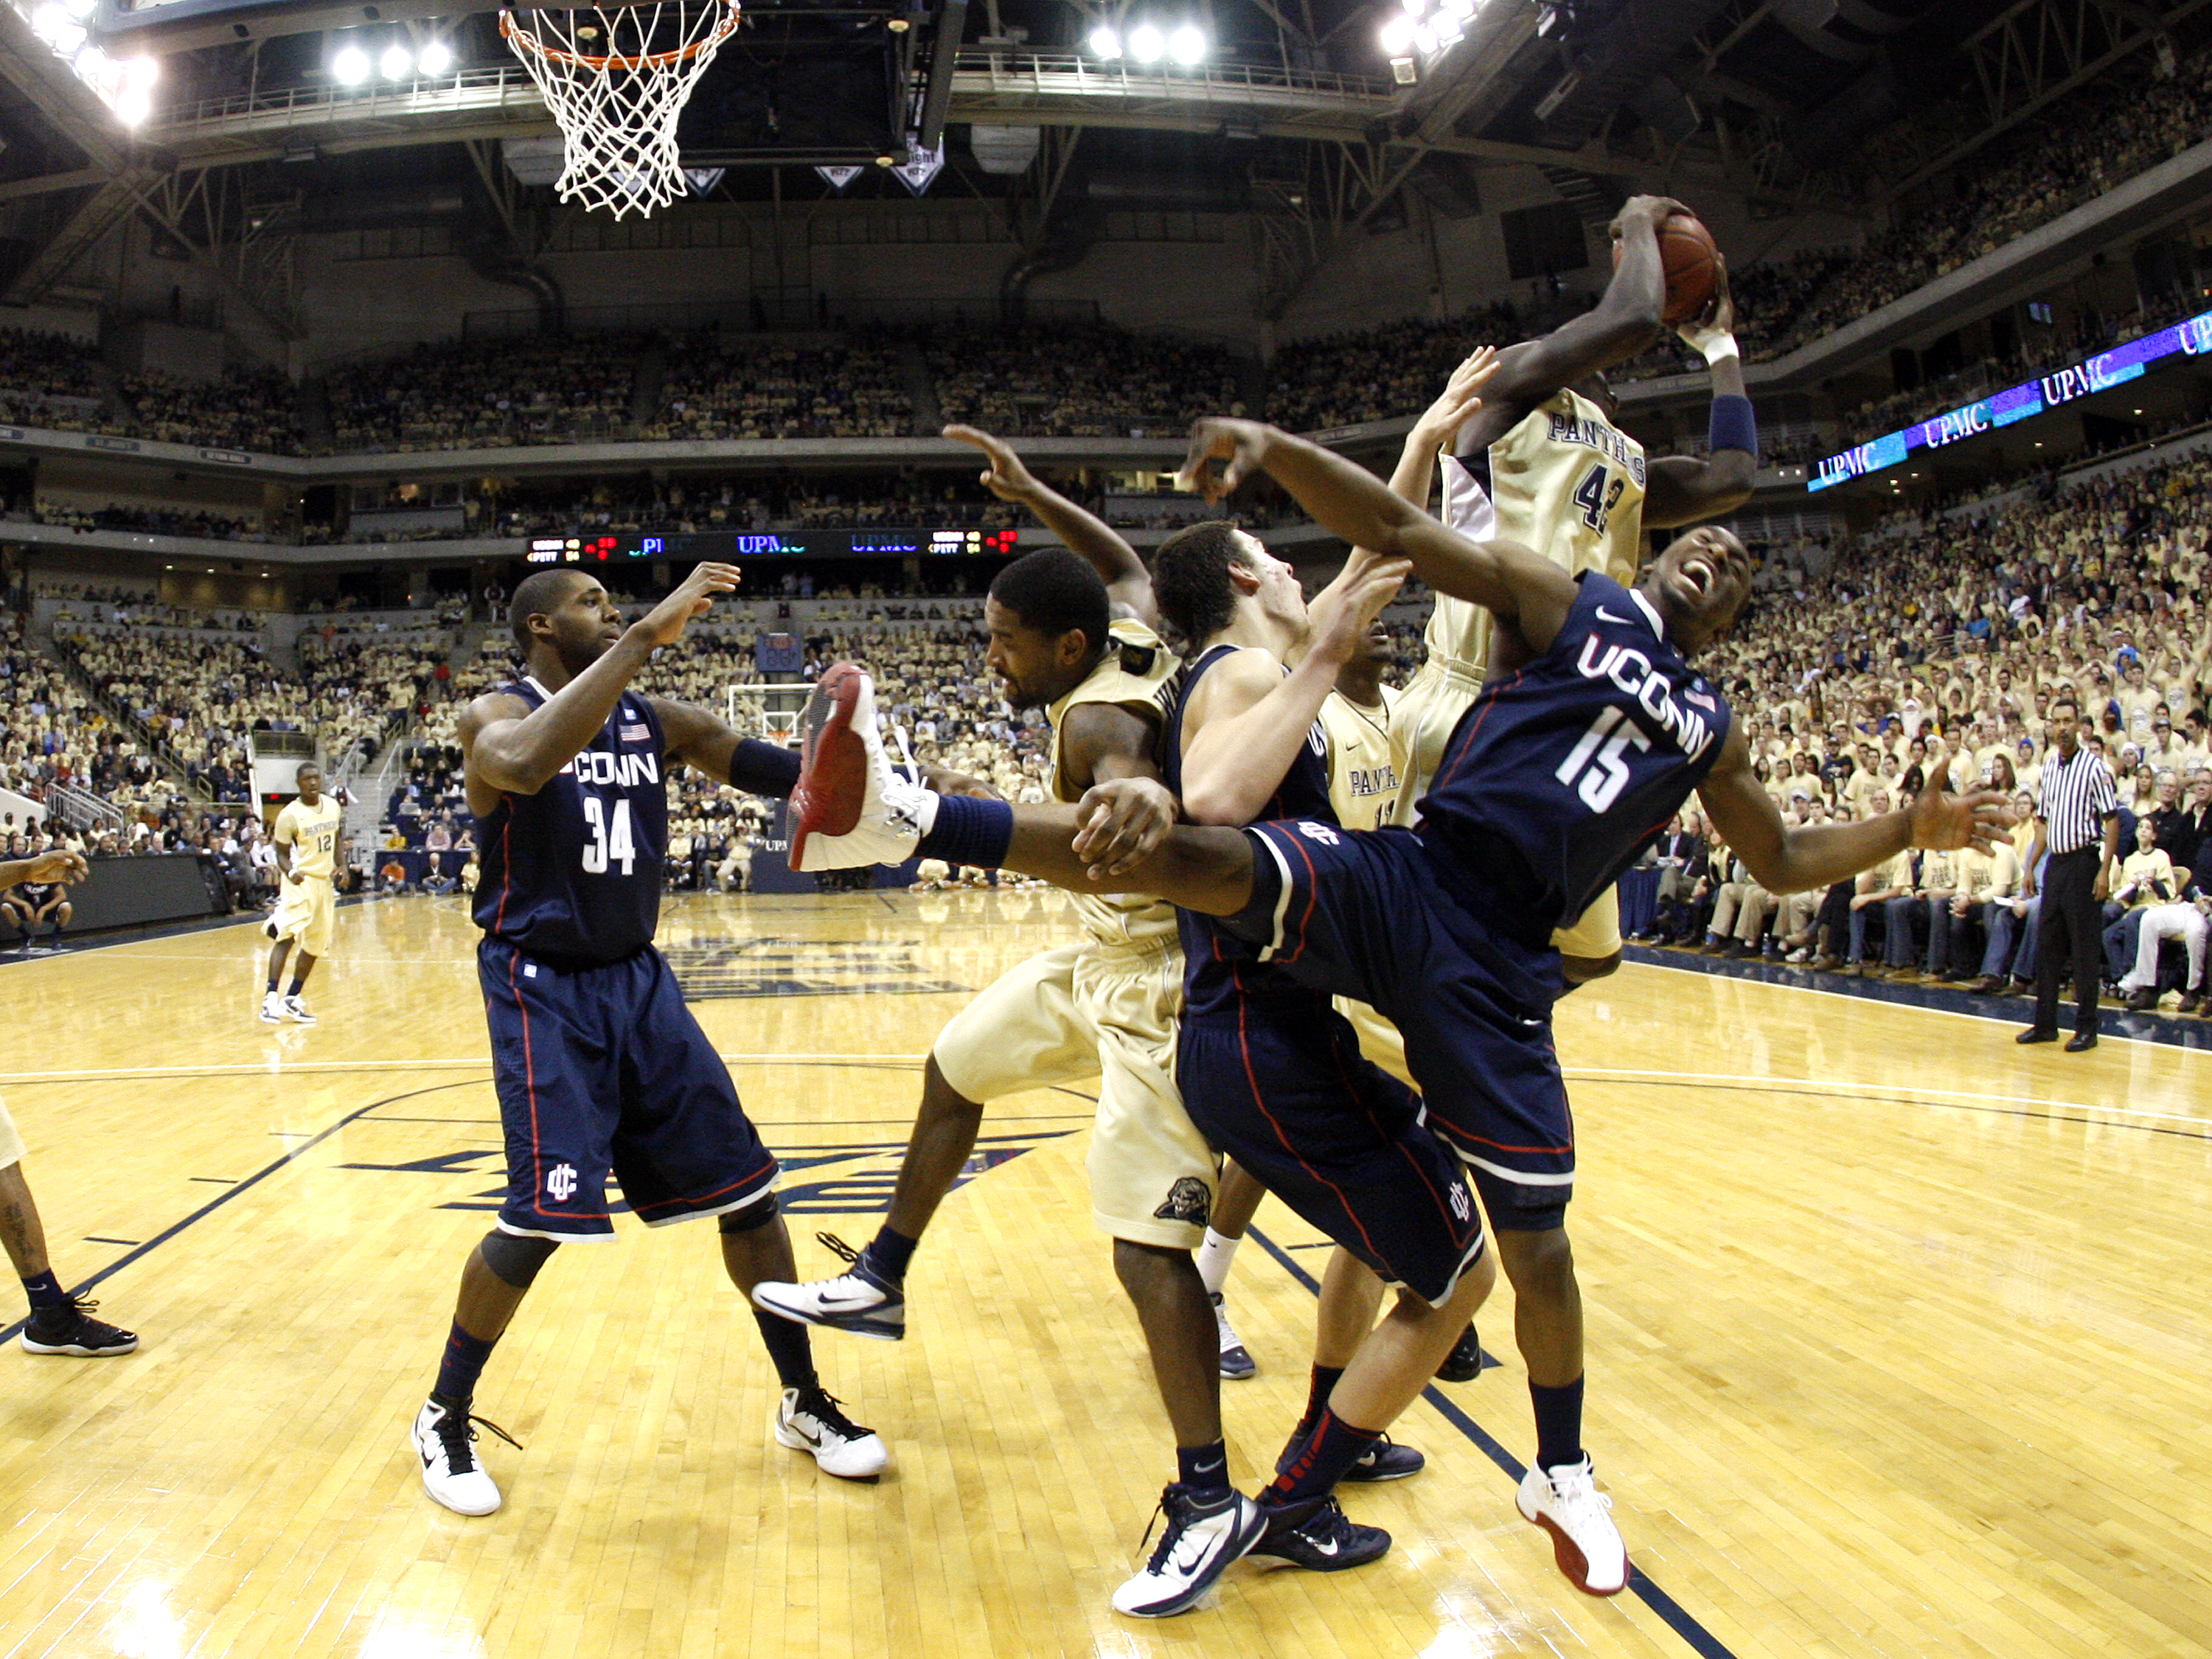 PITTSBURGH, PA - DECEMBER 27:  Kemba Walker #15 of the Connecticut Huskies battles for a rebound against Talib Zanna #42 of the Pittsburgh Panthers at Petersen Events Center on December 27, 2010 in Pittsburgh, Pennsylvania.  Pittsburgh defeated Connecticu